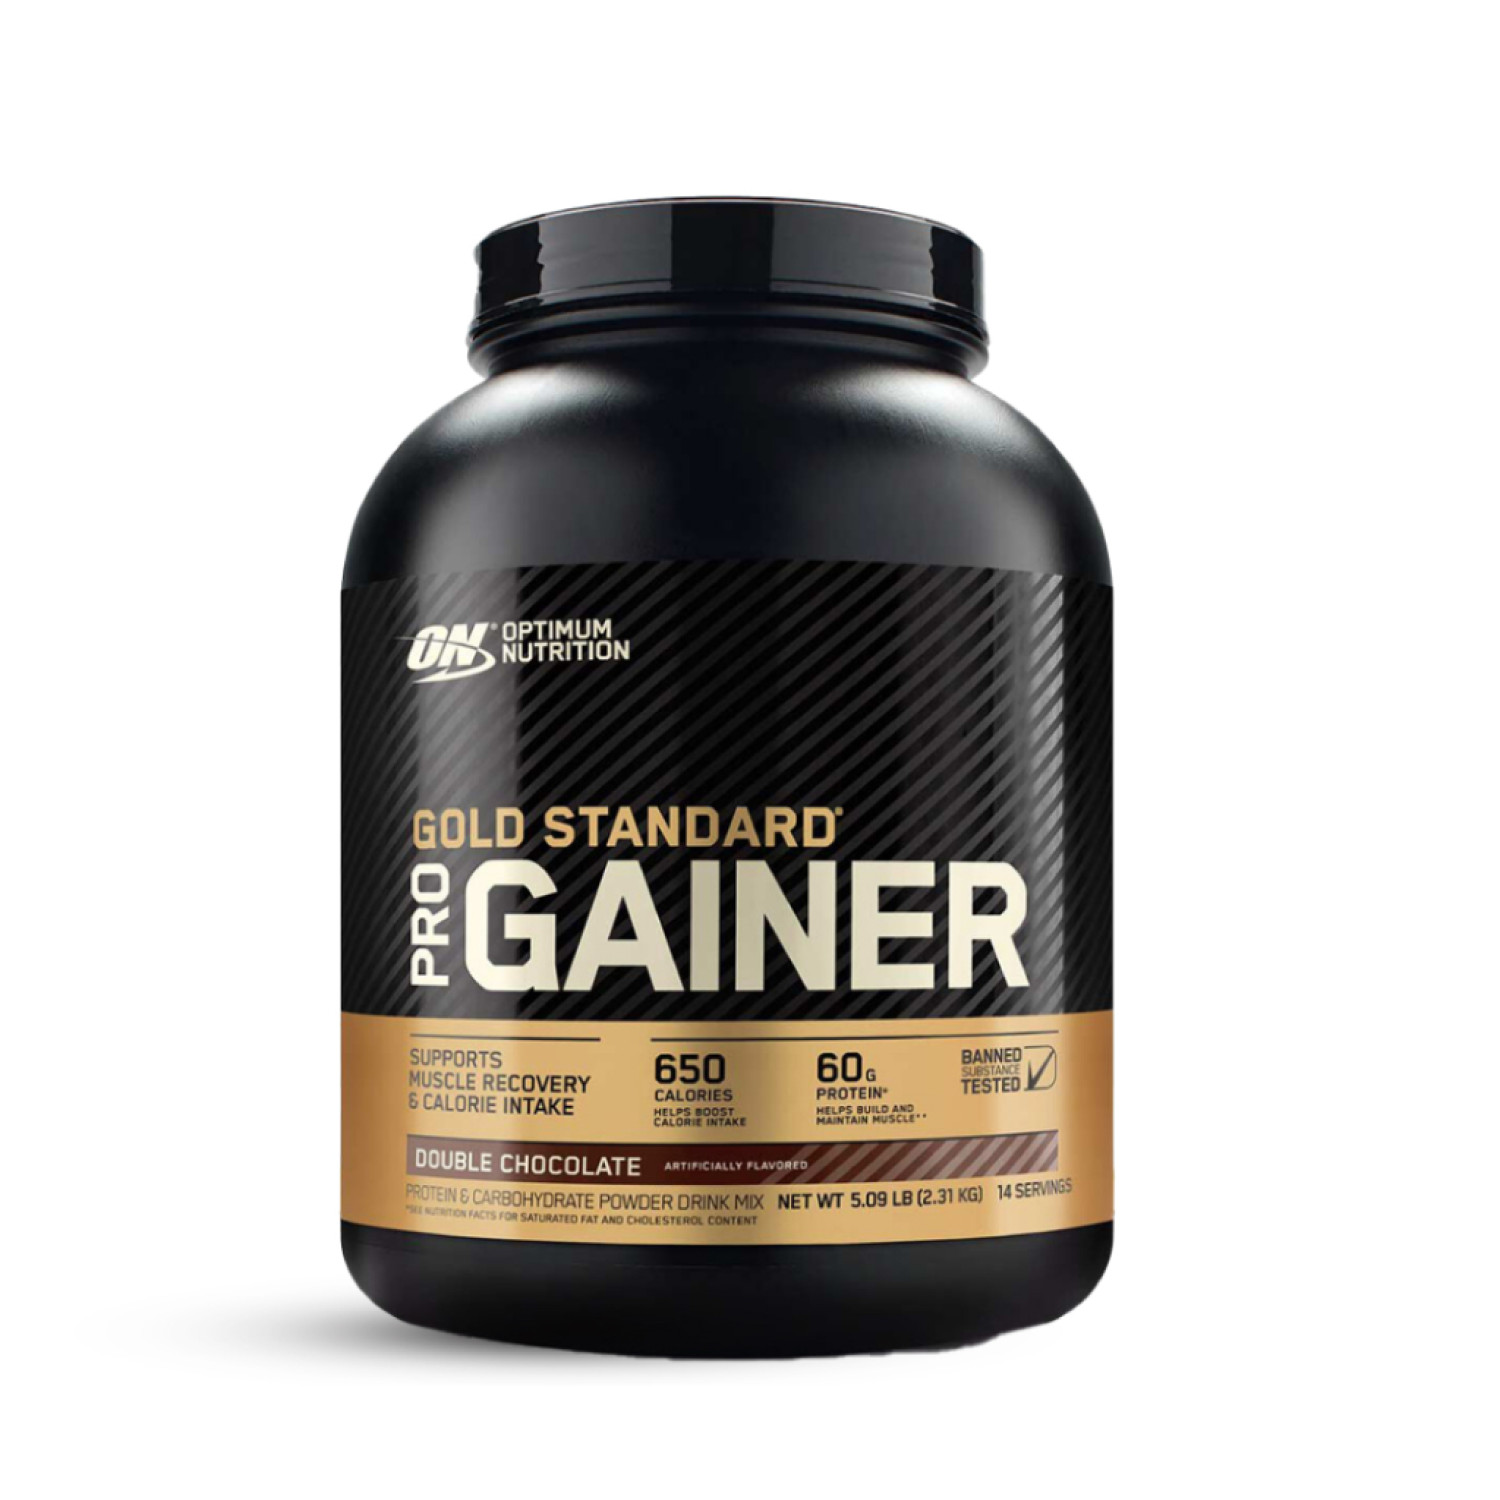 pro-complex-gainer-double-chocolate-509lbs-6535d2e3a2537.jpeg